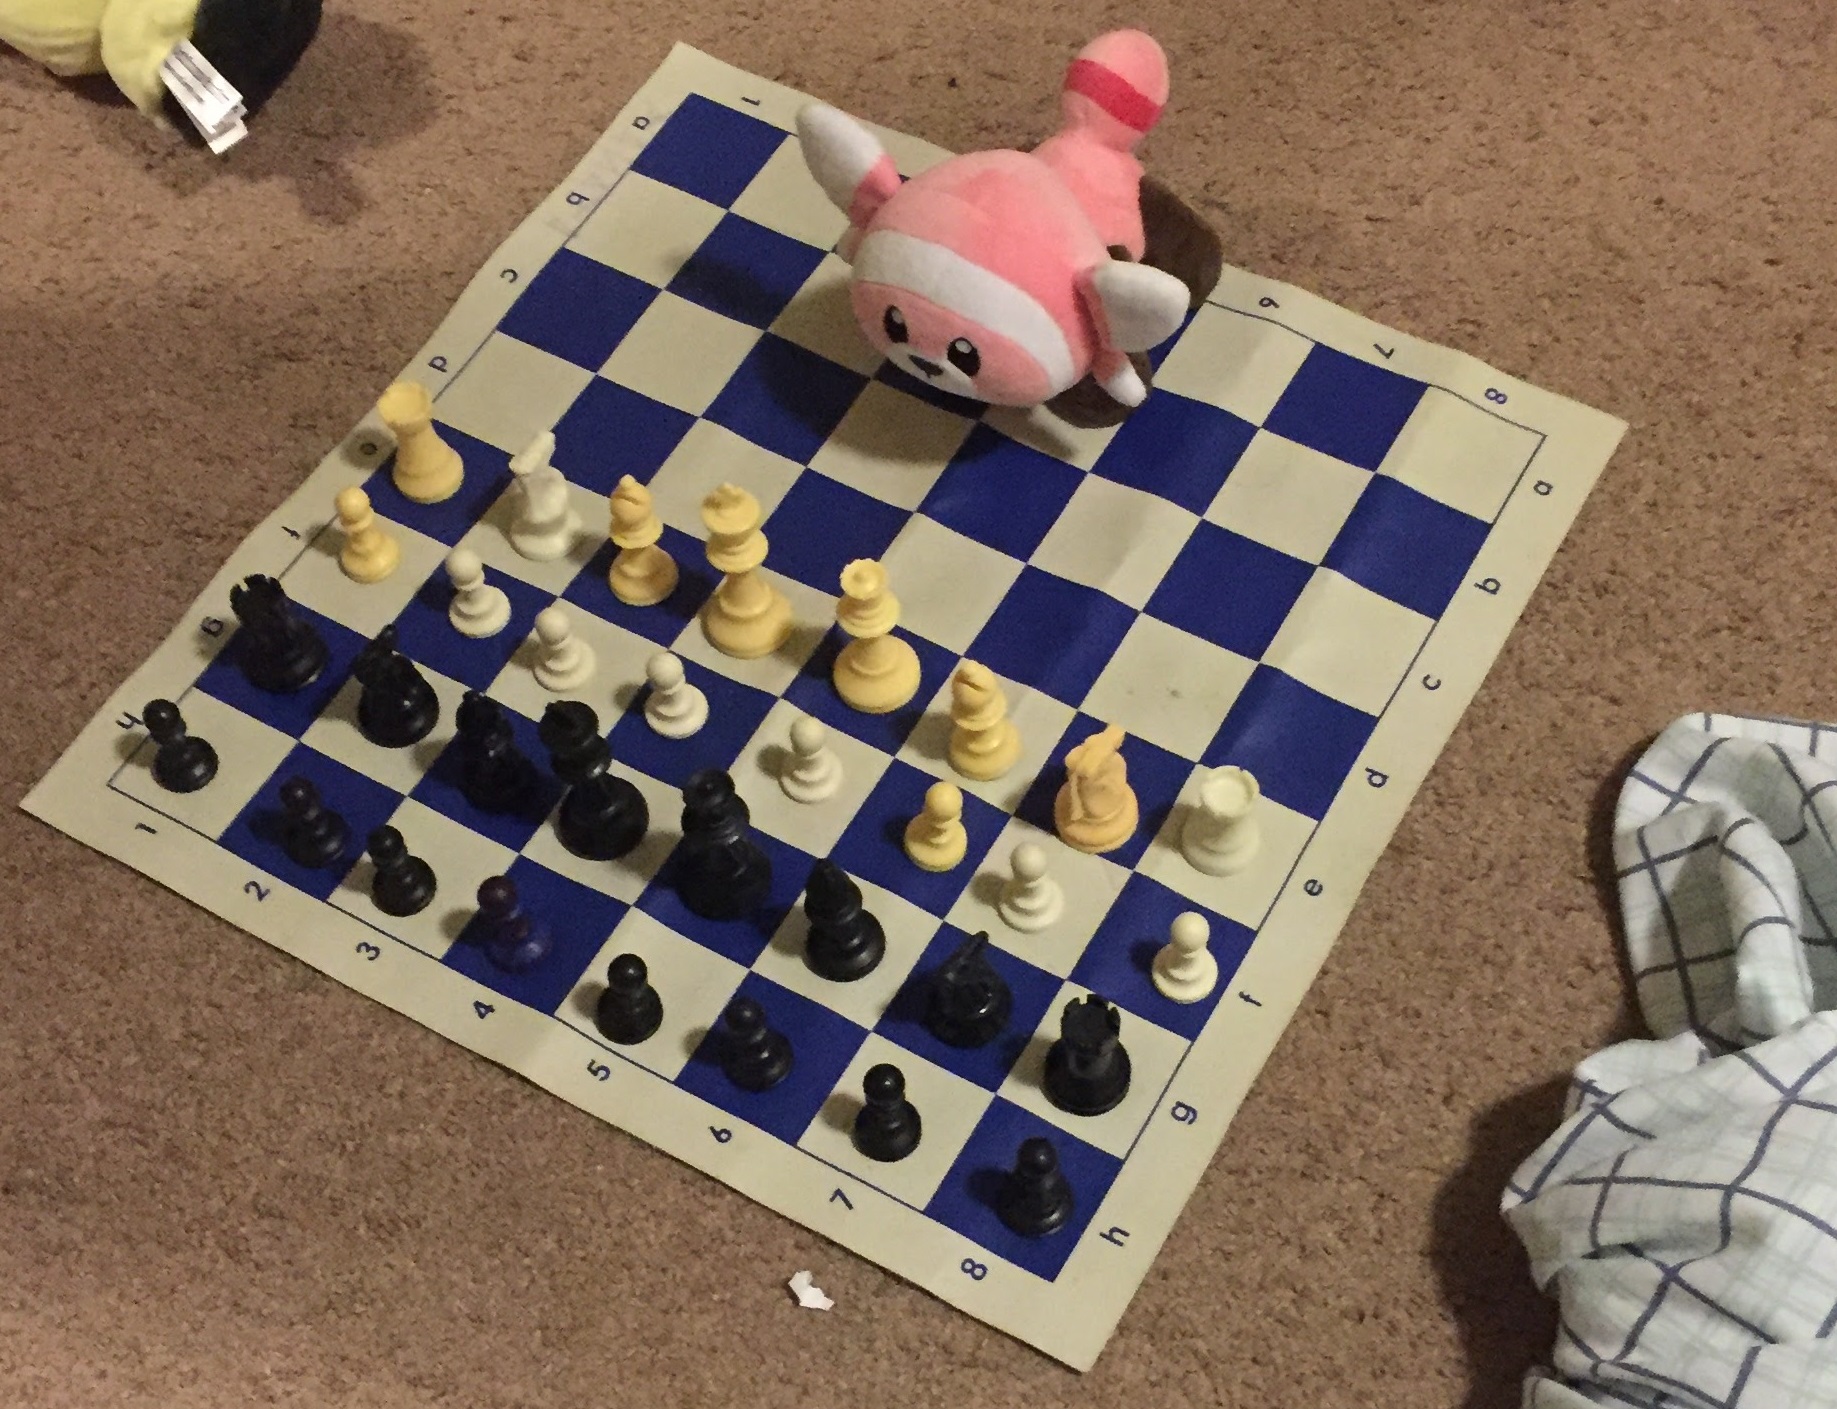 A stuffed animal facing off against 4 rows of chess pieces